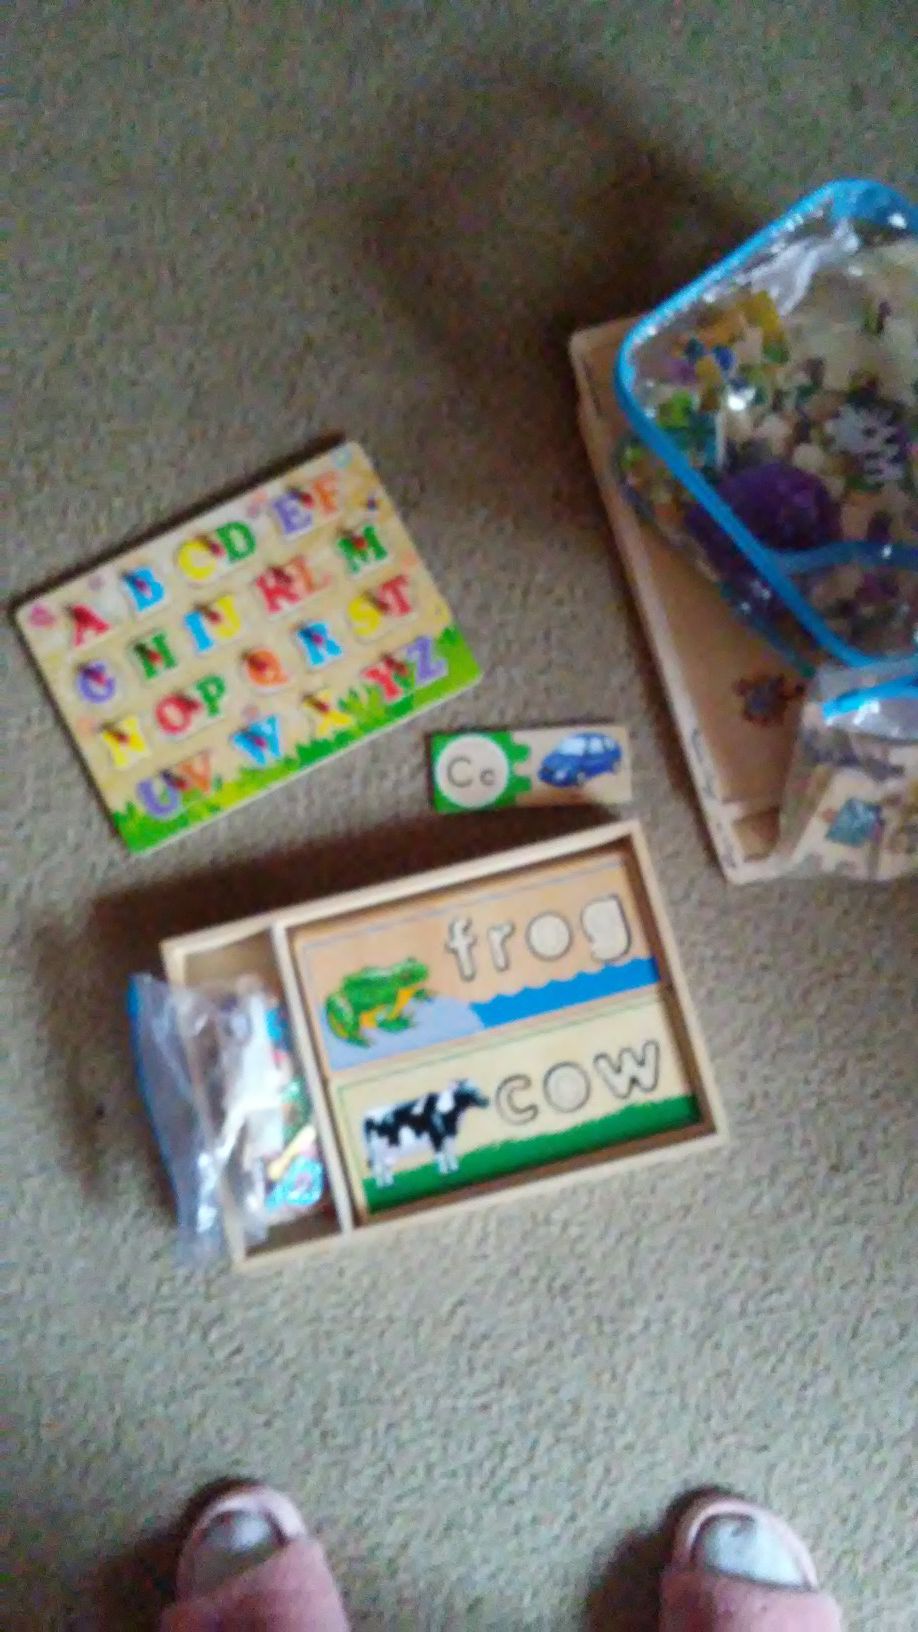 Melissa and Doug wooden puzzles and learning supplies